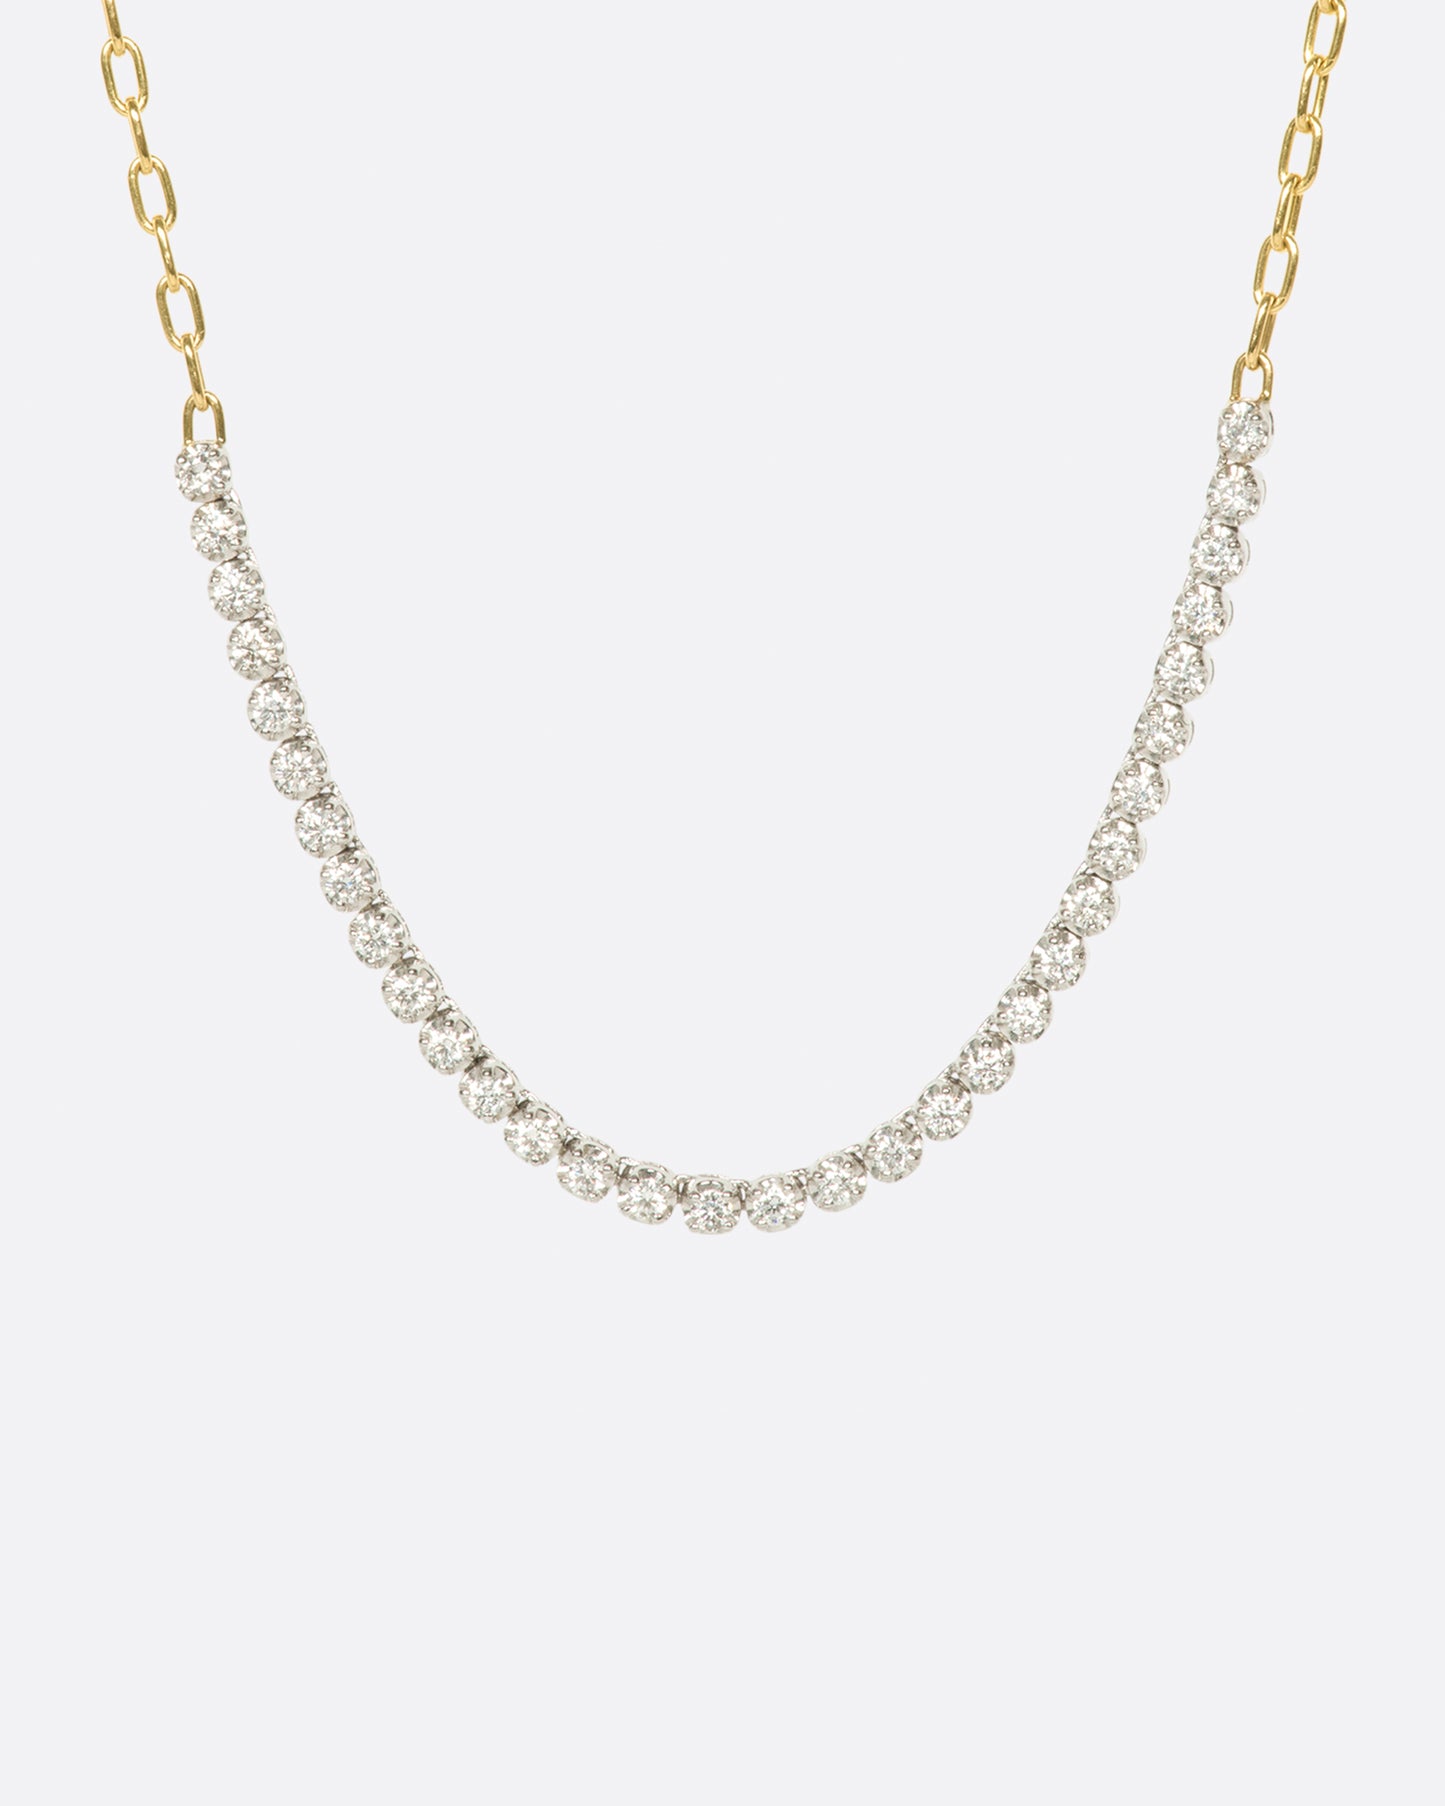 A yellow gold, oval link, chain necklace with four inches of contrasting white diamonds.